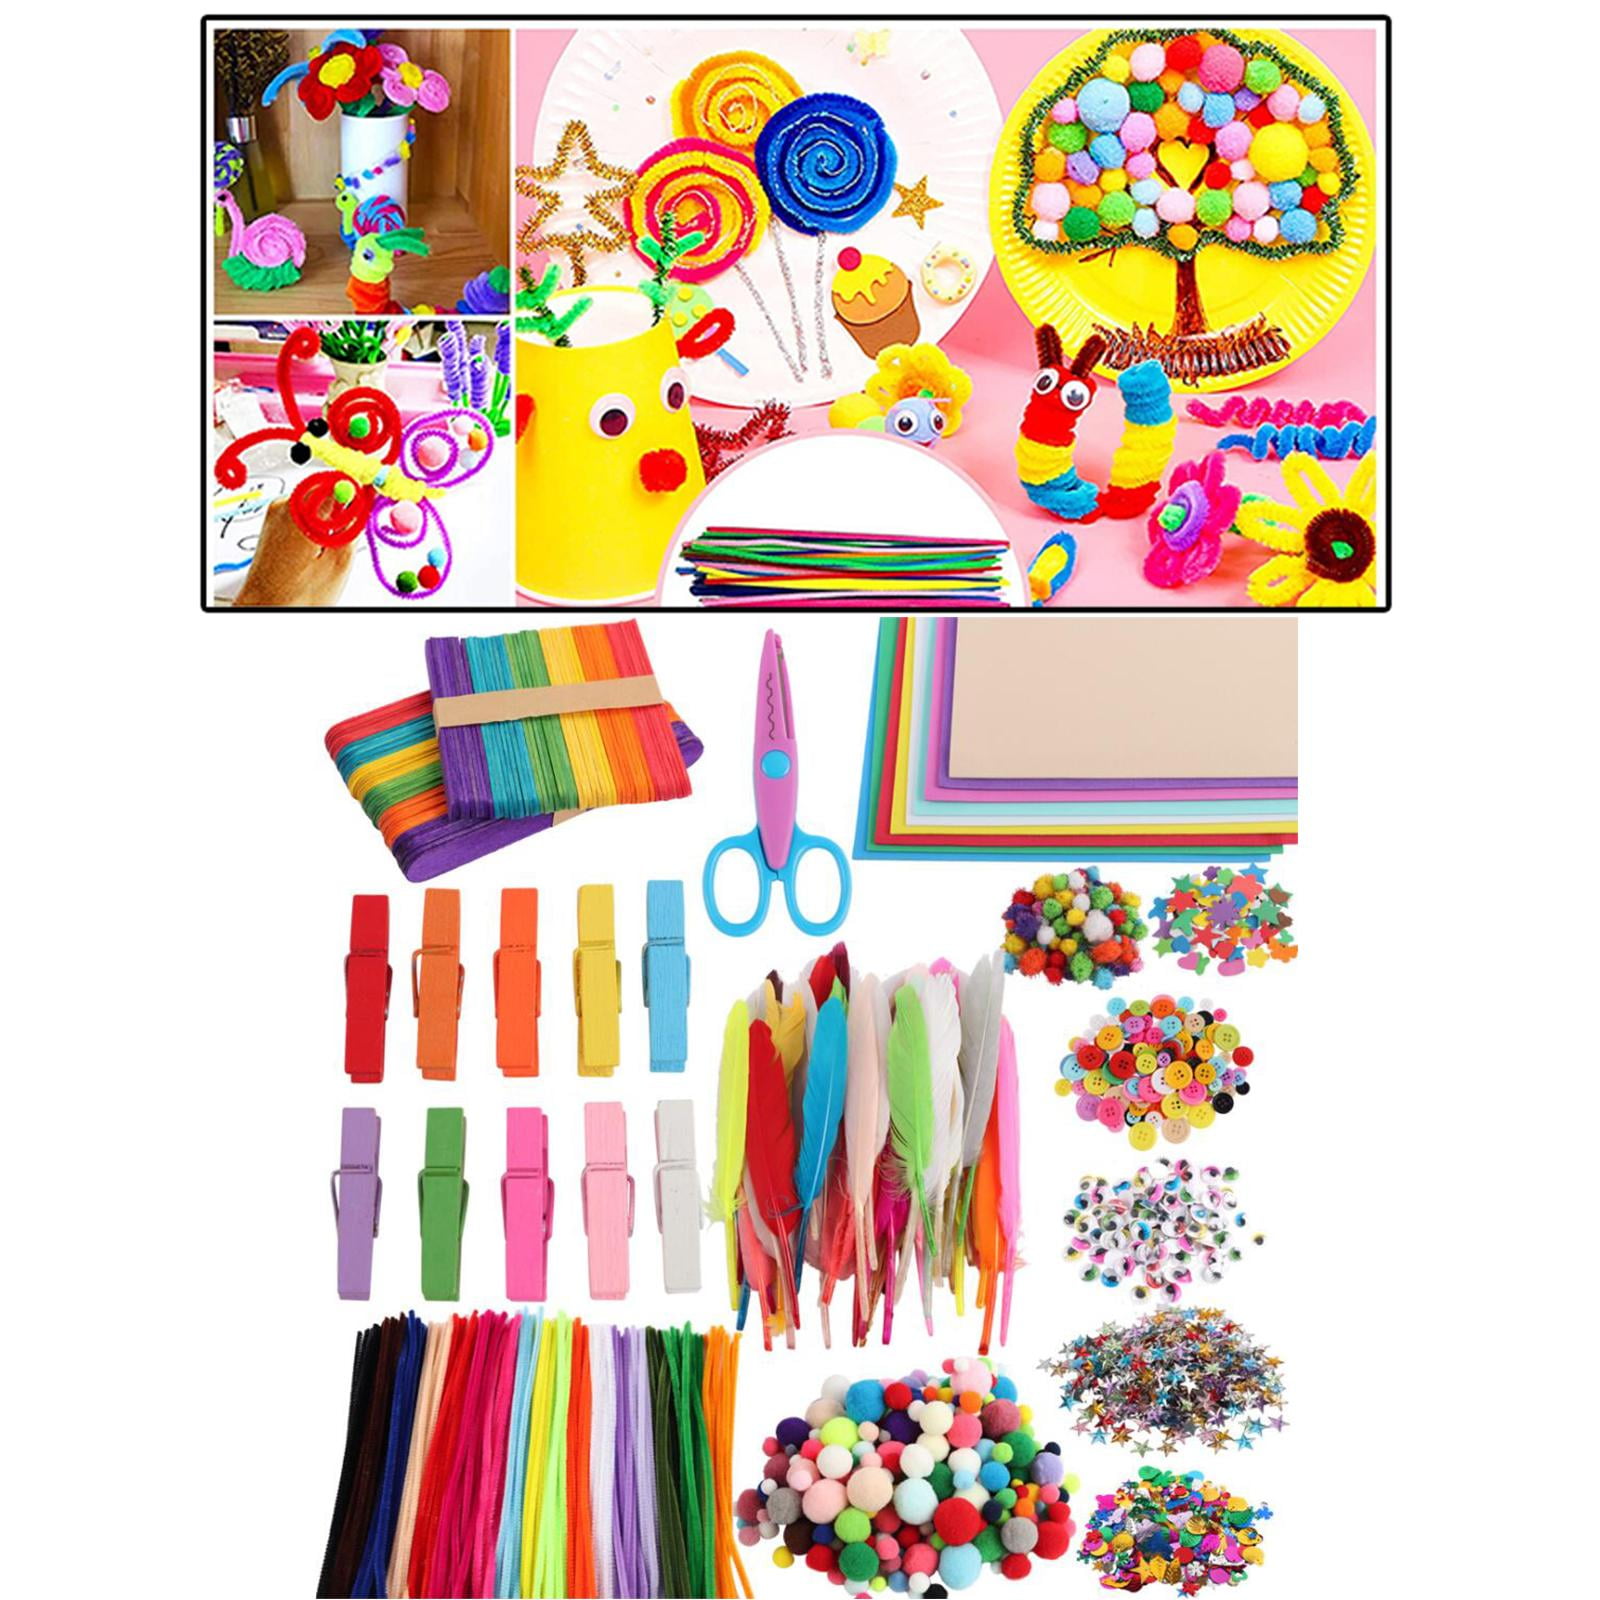 Put&Pull Arts and Crafts for Girls/Teens/Kids - 10 DIY Project Ideas,  Creative Set, Stem Toys/Making Kit Felt Squares/Crafting Set/Birthd - Arts  and Crafts for Girls/Teens/Kids - 10 DIY Project Ideas, Creative Set